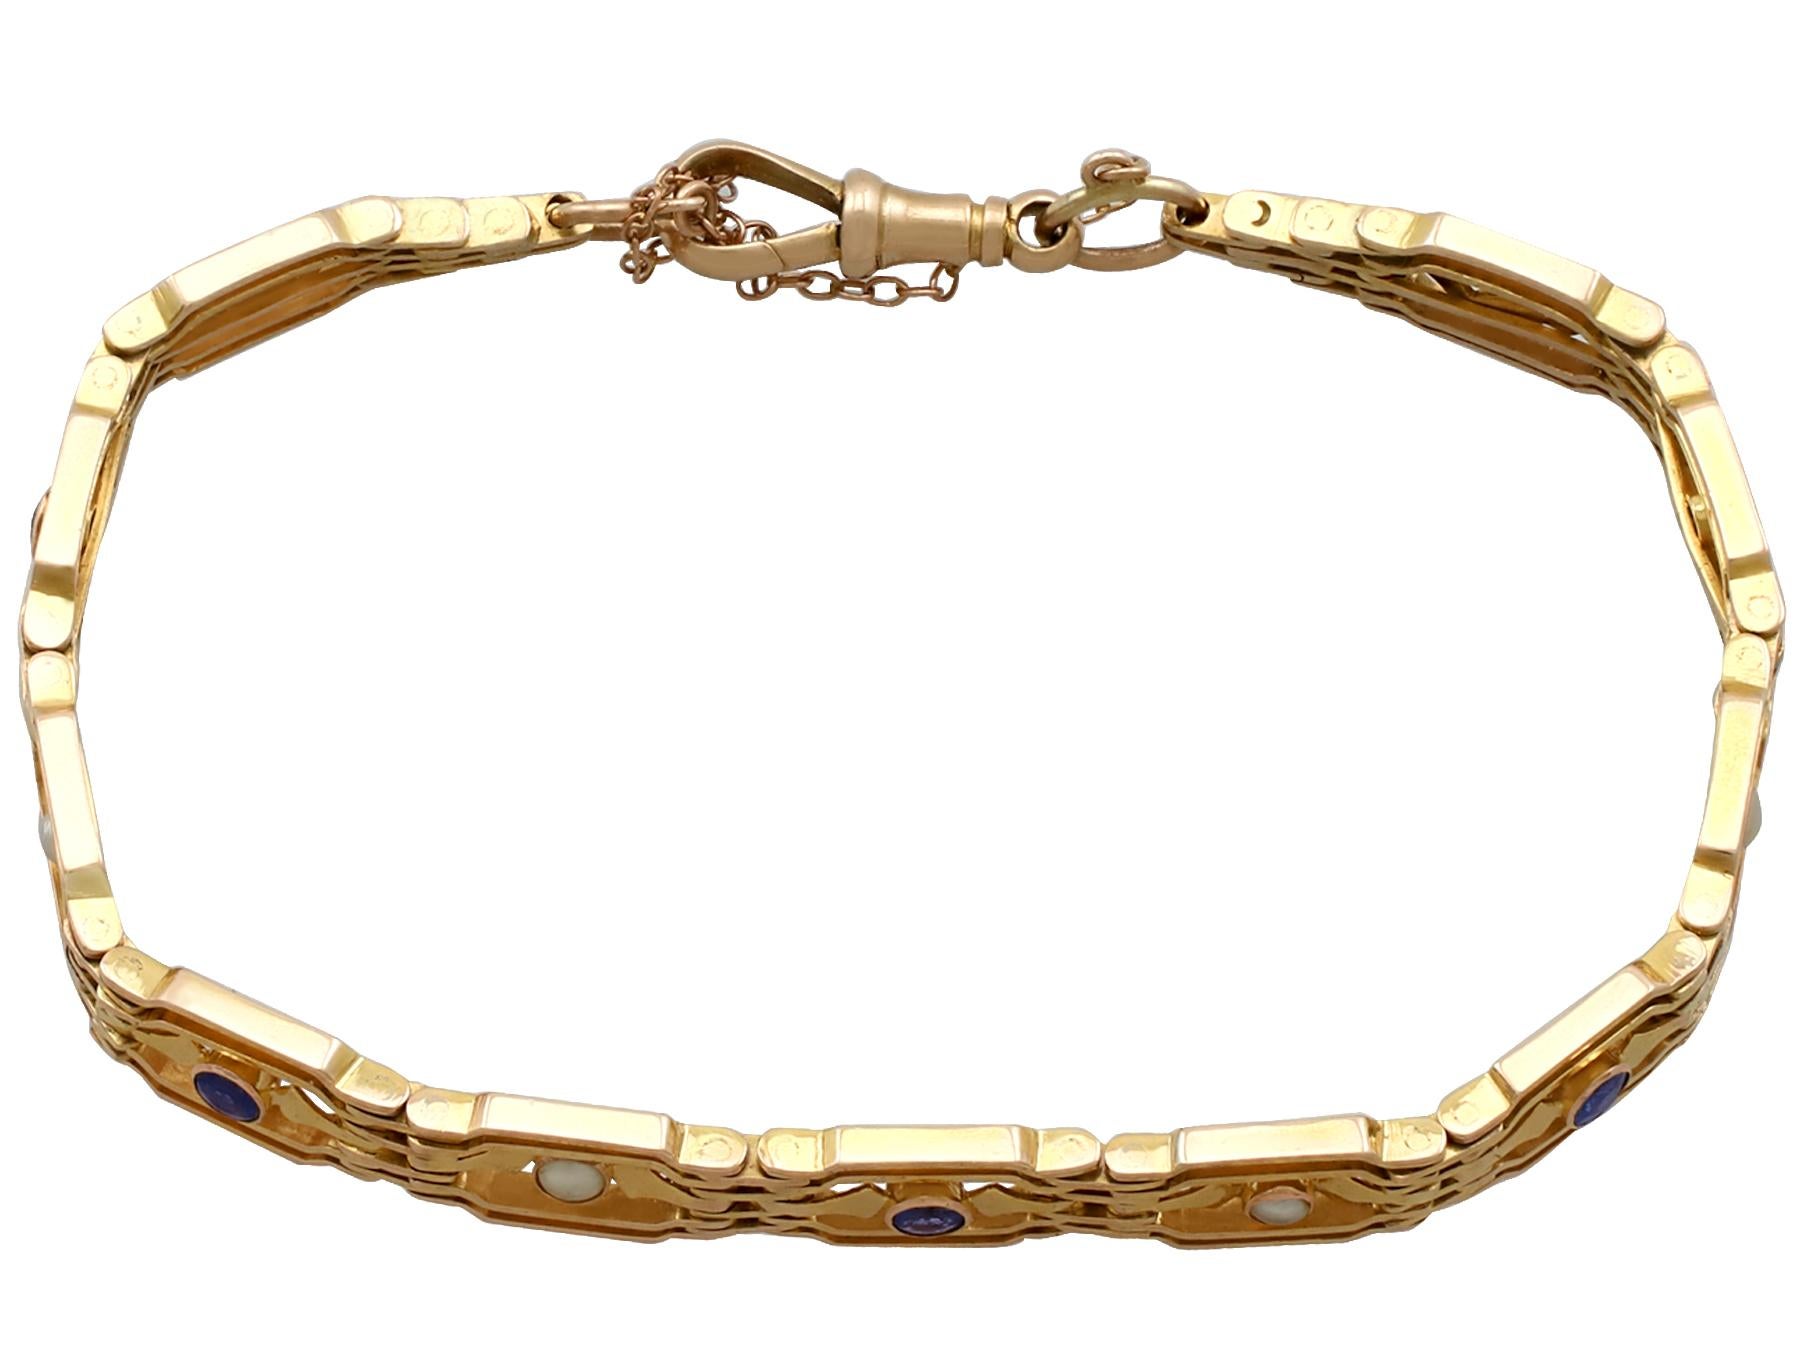 An impressive antique 0.65 carat sapphire and seed pearl, 9 karat yellow gold gate style bracelet; part of our diverse antique jewelry collections.

This fine and impressive sapphire and pearl bracelet has been crafted in 9k yellow gold.

The eleven